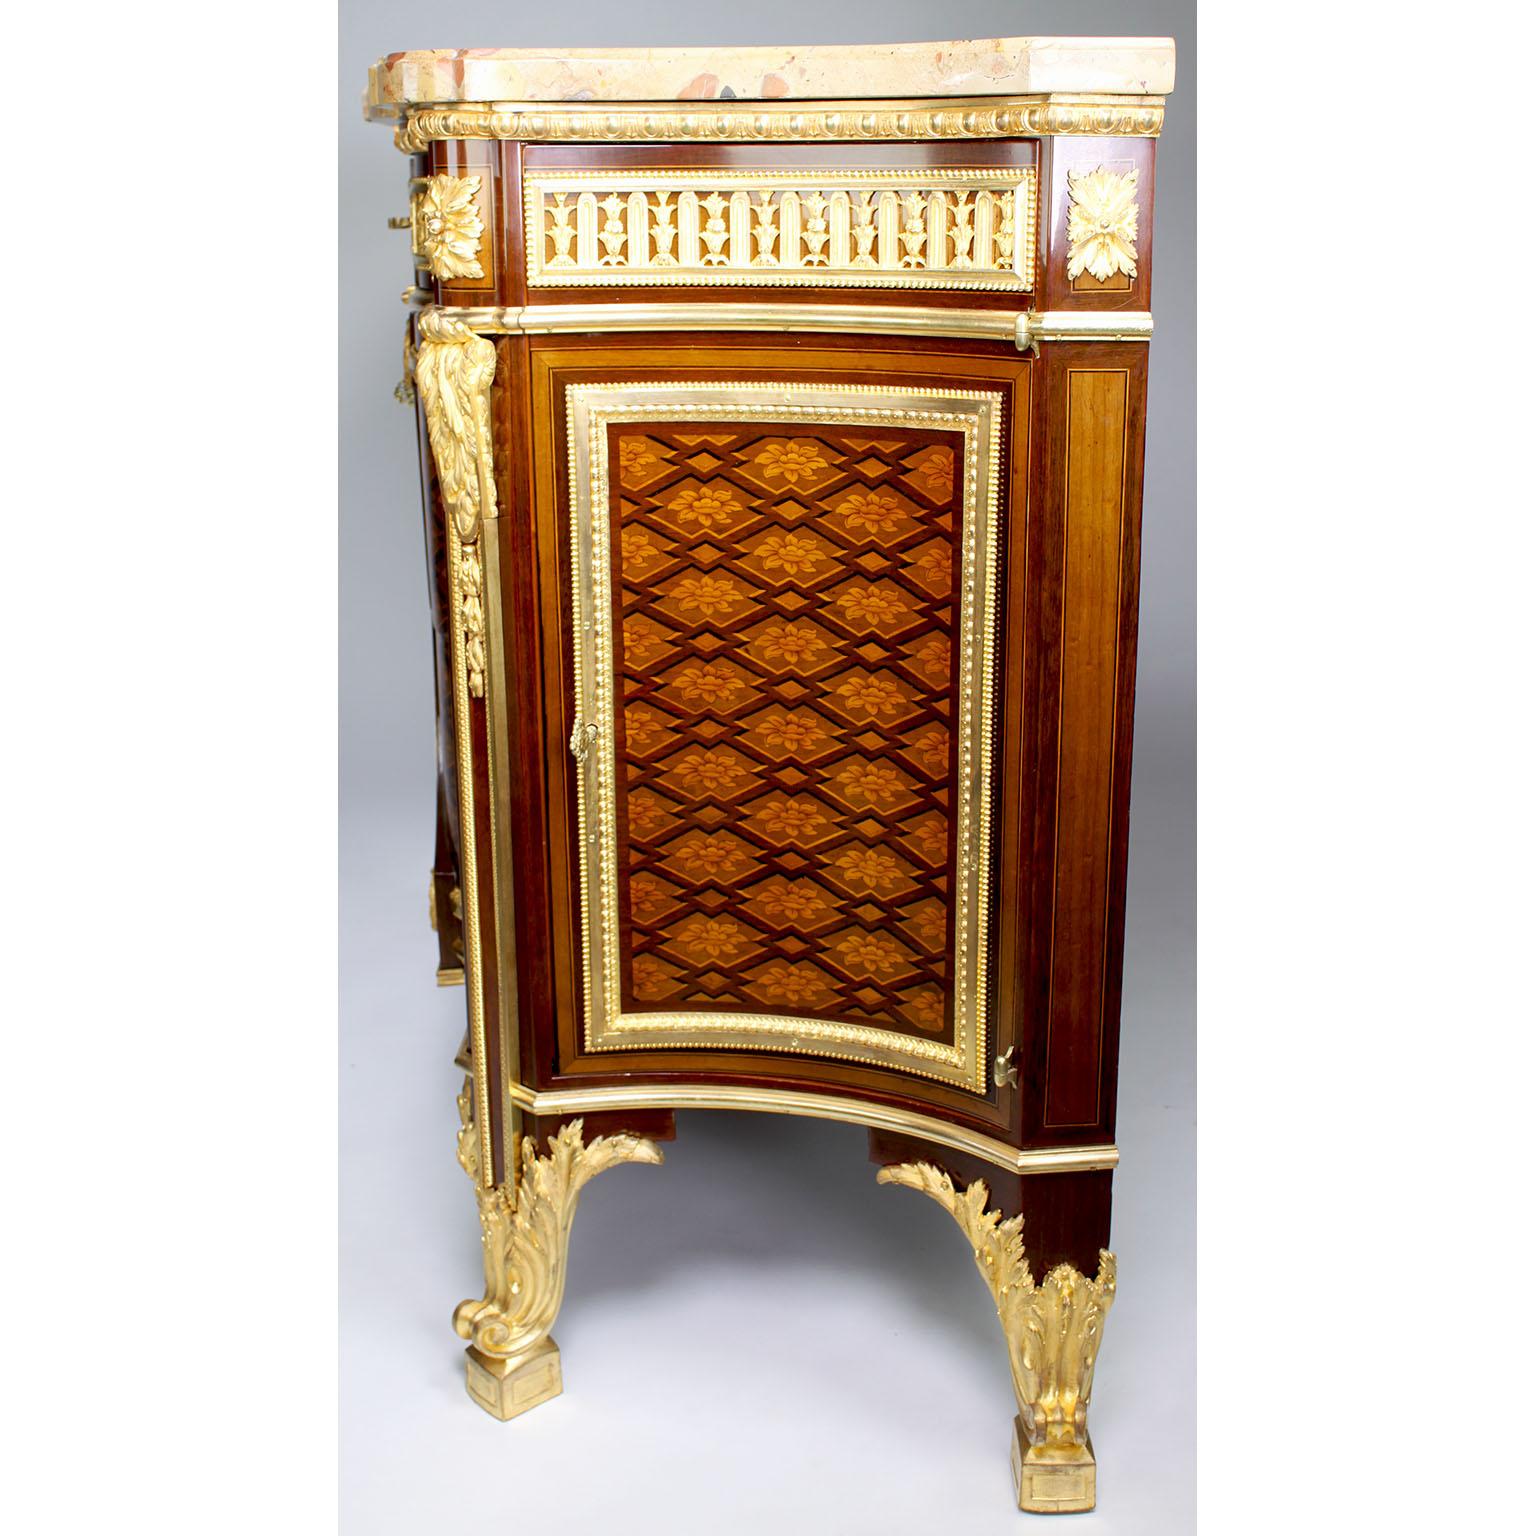 French 19th Century Louis XV-XVI Ormolu Mounted Marquetry Commode Marble Top For Sale 6